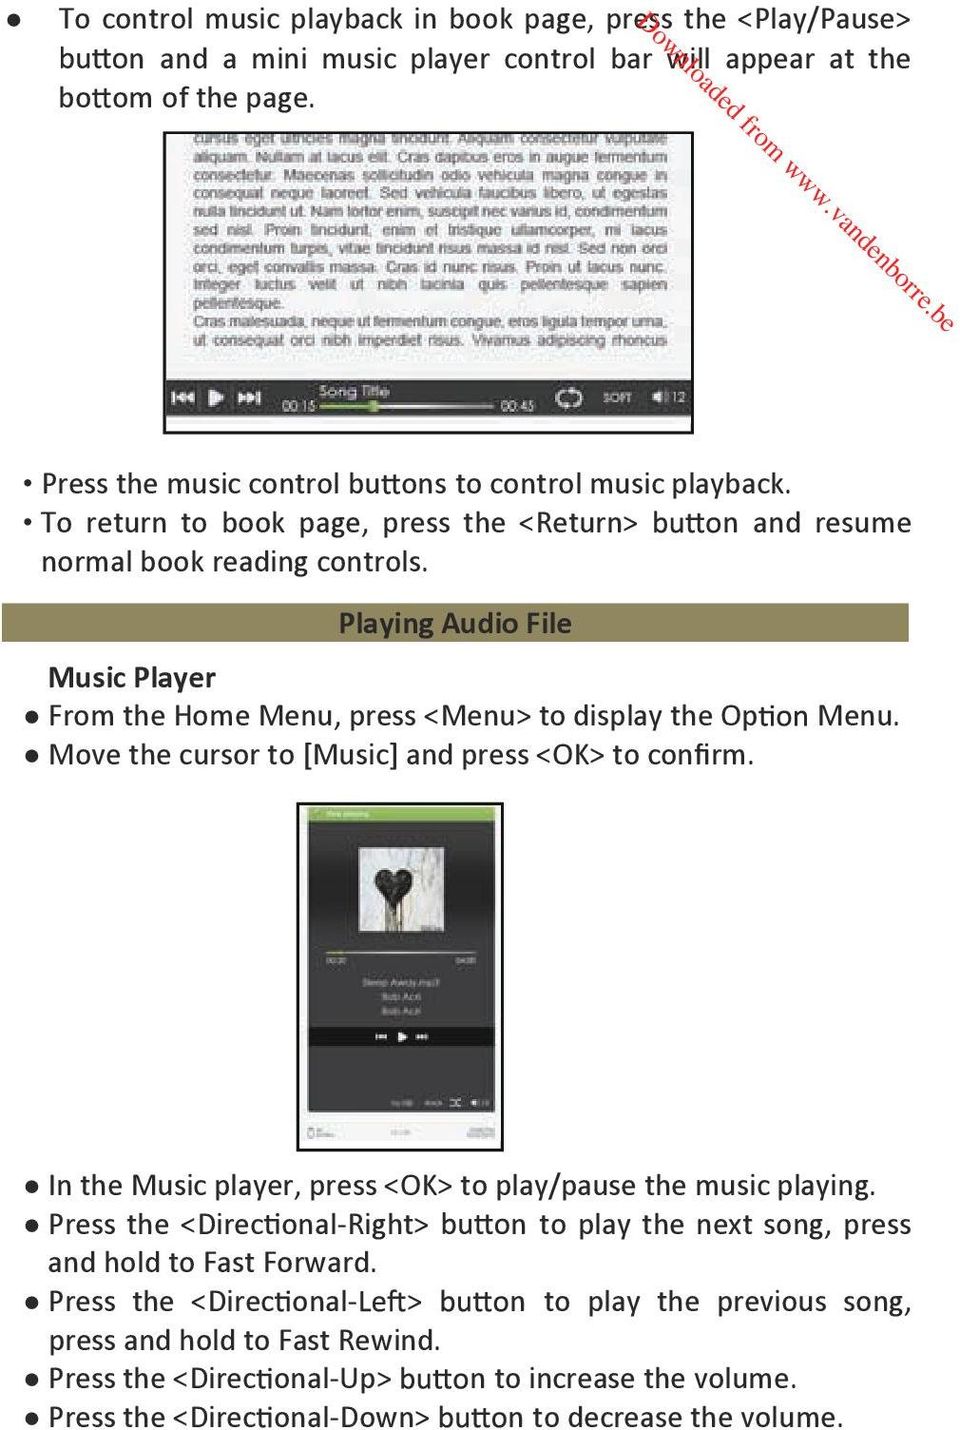 Playing Audio File Music Player From the Home Menu, press <Menu> to display the Op Menu. Move the cursor to [Music] and press <OK> to confirm.